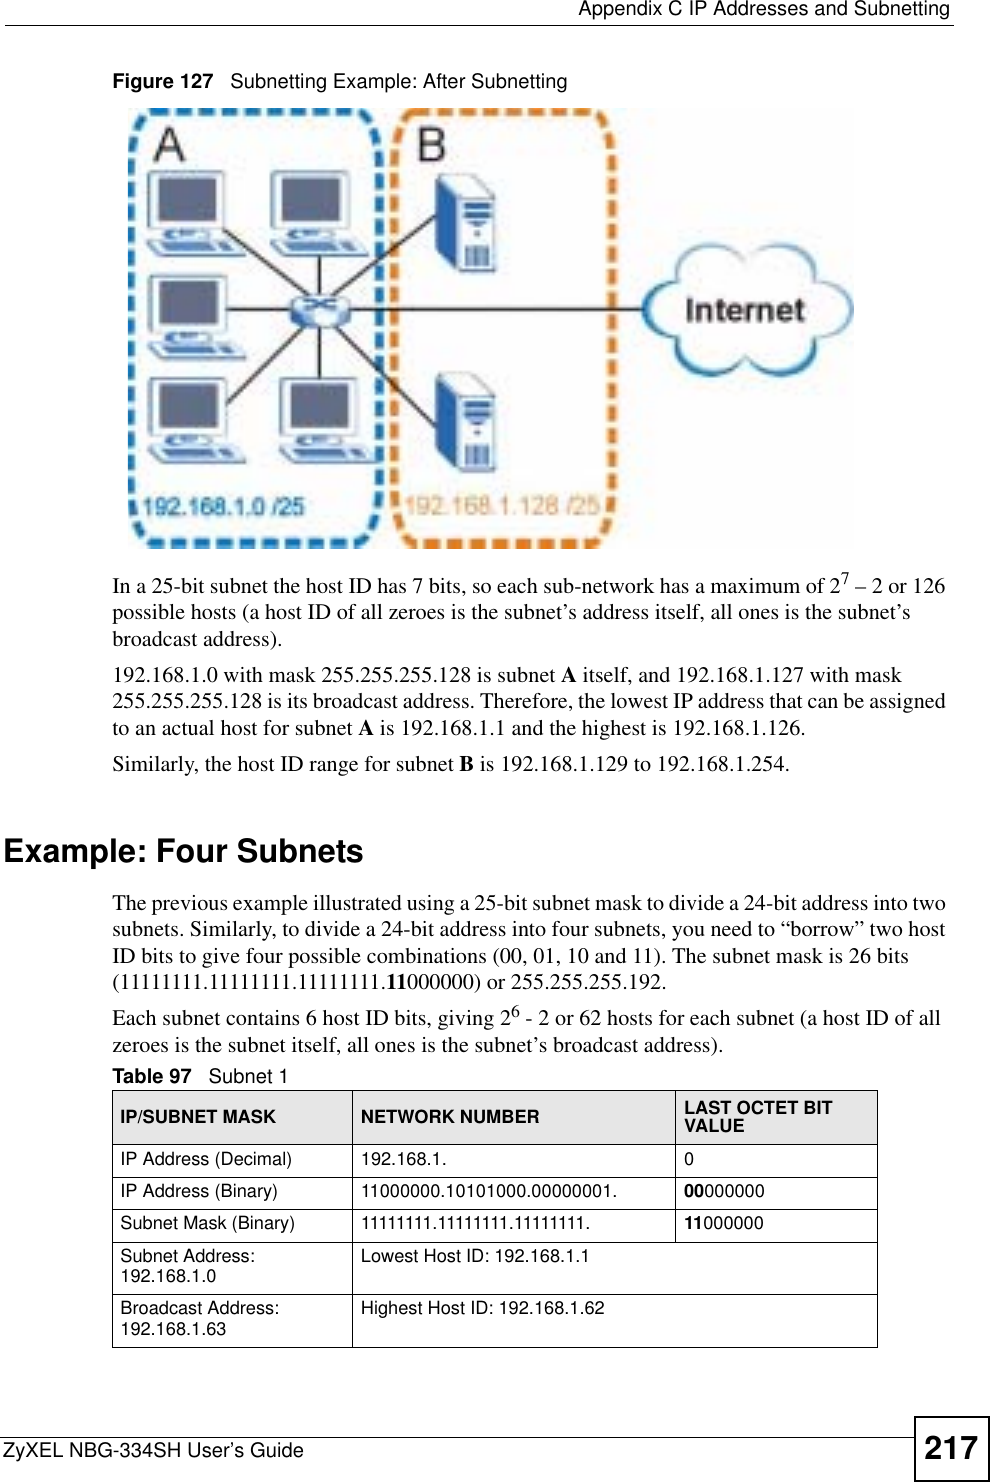  Appendix C IP Addresses and SubnettingZyXEL NBG-334SH User’s Guide 217Figure 127   Subnetting Example: After SubnettingIn a 25-bit subnet the host ID has 7 bits, so each sub-network has a maximum of 27 – 2 or 126 possible hosts (a host ID of all zeroes is the subnet’s address itself, all ones is the subnet’s broadcast address).192.168.1.0 with mask 255.255.255.128 is subnet A itself, and 192.168.1.127 with mask 255.255.255.128 is its broadcast address. Therefore, the lowest IP address that can be assigned to an actual host for subnet A is 192.168.1.1 and the highest is 192.168.1.126. Similarly, the host ID range for subnet B is 192.168.1.129 to 192.168.1.254.Example: Four Subnets The previous example illustrated using a 25-bit subnet mask to divide a 24-bit address into two subnets. Similarly, to divide a 24-bit address into four subnets, you need to “borrow” two host ID bits to give four possible combinations (00, 01, 10 and 11). The subnet mask is 26 bits (11111111.11111111.11111111.11000000) or 255.255.255.192. Each subnet contains 6 host ID bits, giving 26 - 2 or 62 hosts for each subnet (a host ID of all zeroes is the subnet itself, all ones is the subnet’s broadcast address). Table 97   Subnet 1IP/SUBNET MASK NETWORK NUMBER LAST OCTET BIT VALUEIP Address (Decimal) 192.168.1. 0IP Address (Binary) 11000000.10101000.00000001. 00000000Subnet Mask (Binary) 11111111.11111111.11111111. 11000000Subnet Address: 192.168.1.0 Lowest Host ID: 192.168.1.1Broadcast Address: 192.168.1.63 Highest Host ID: 192.168.1.62